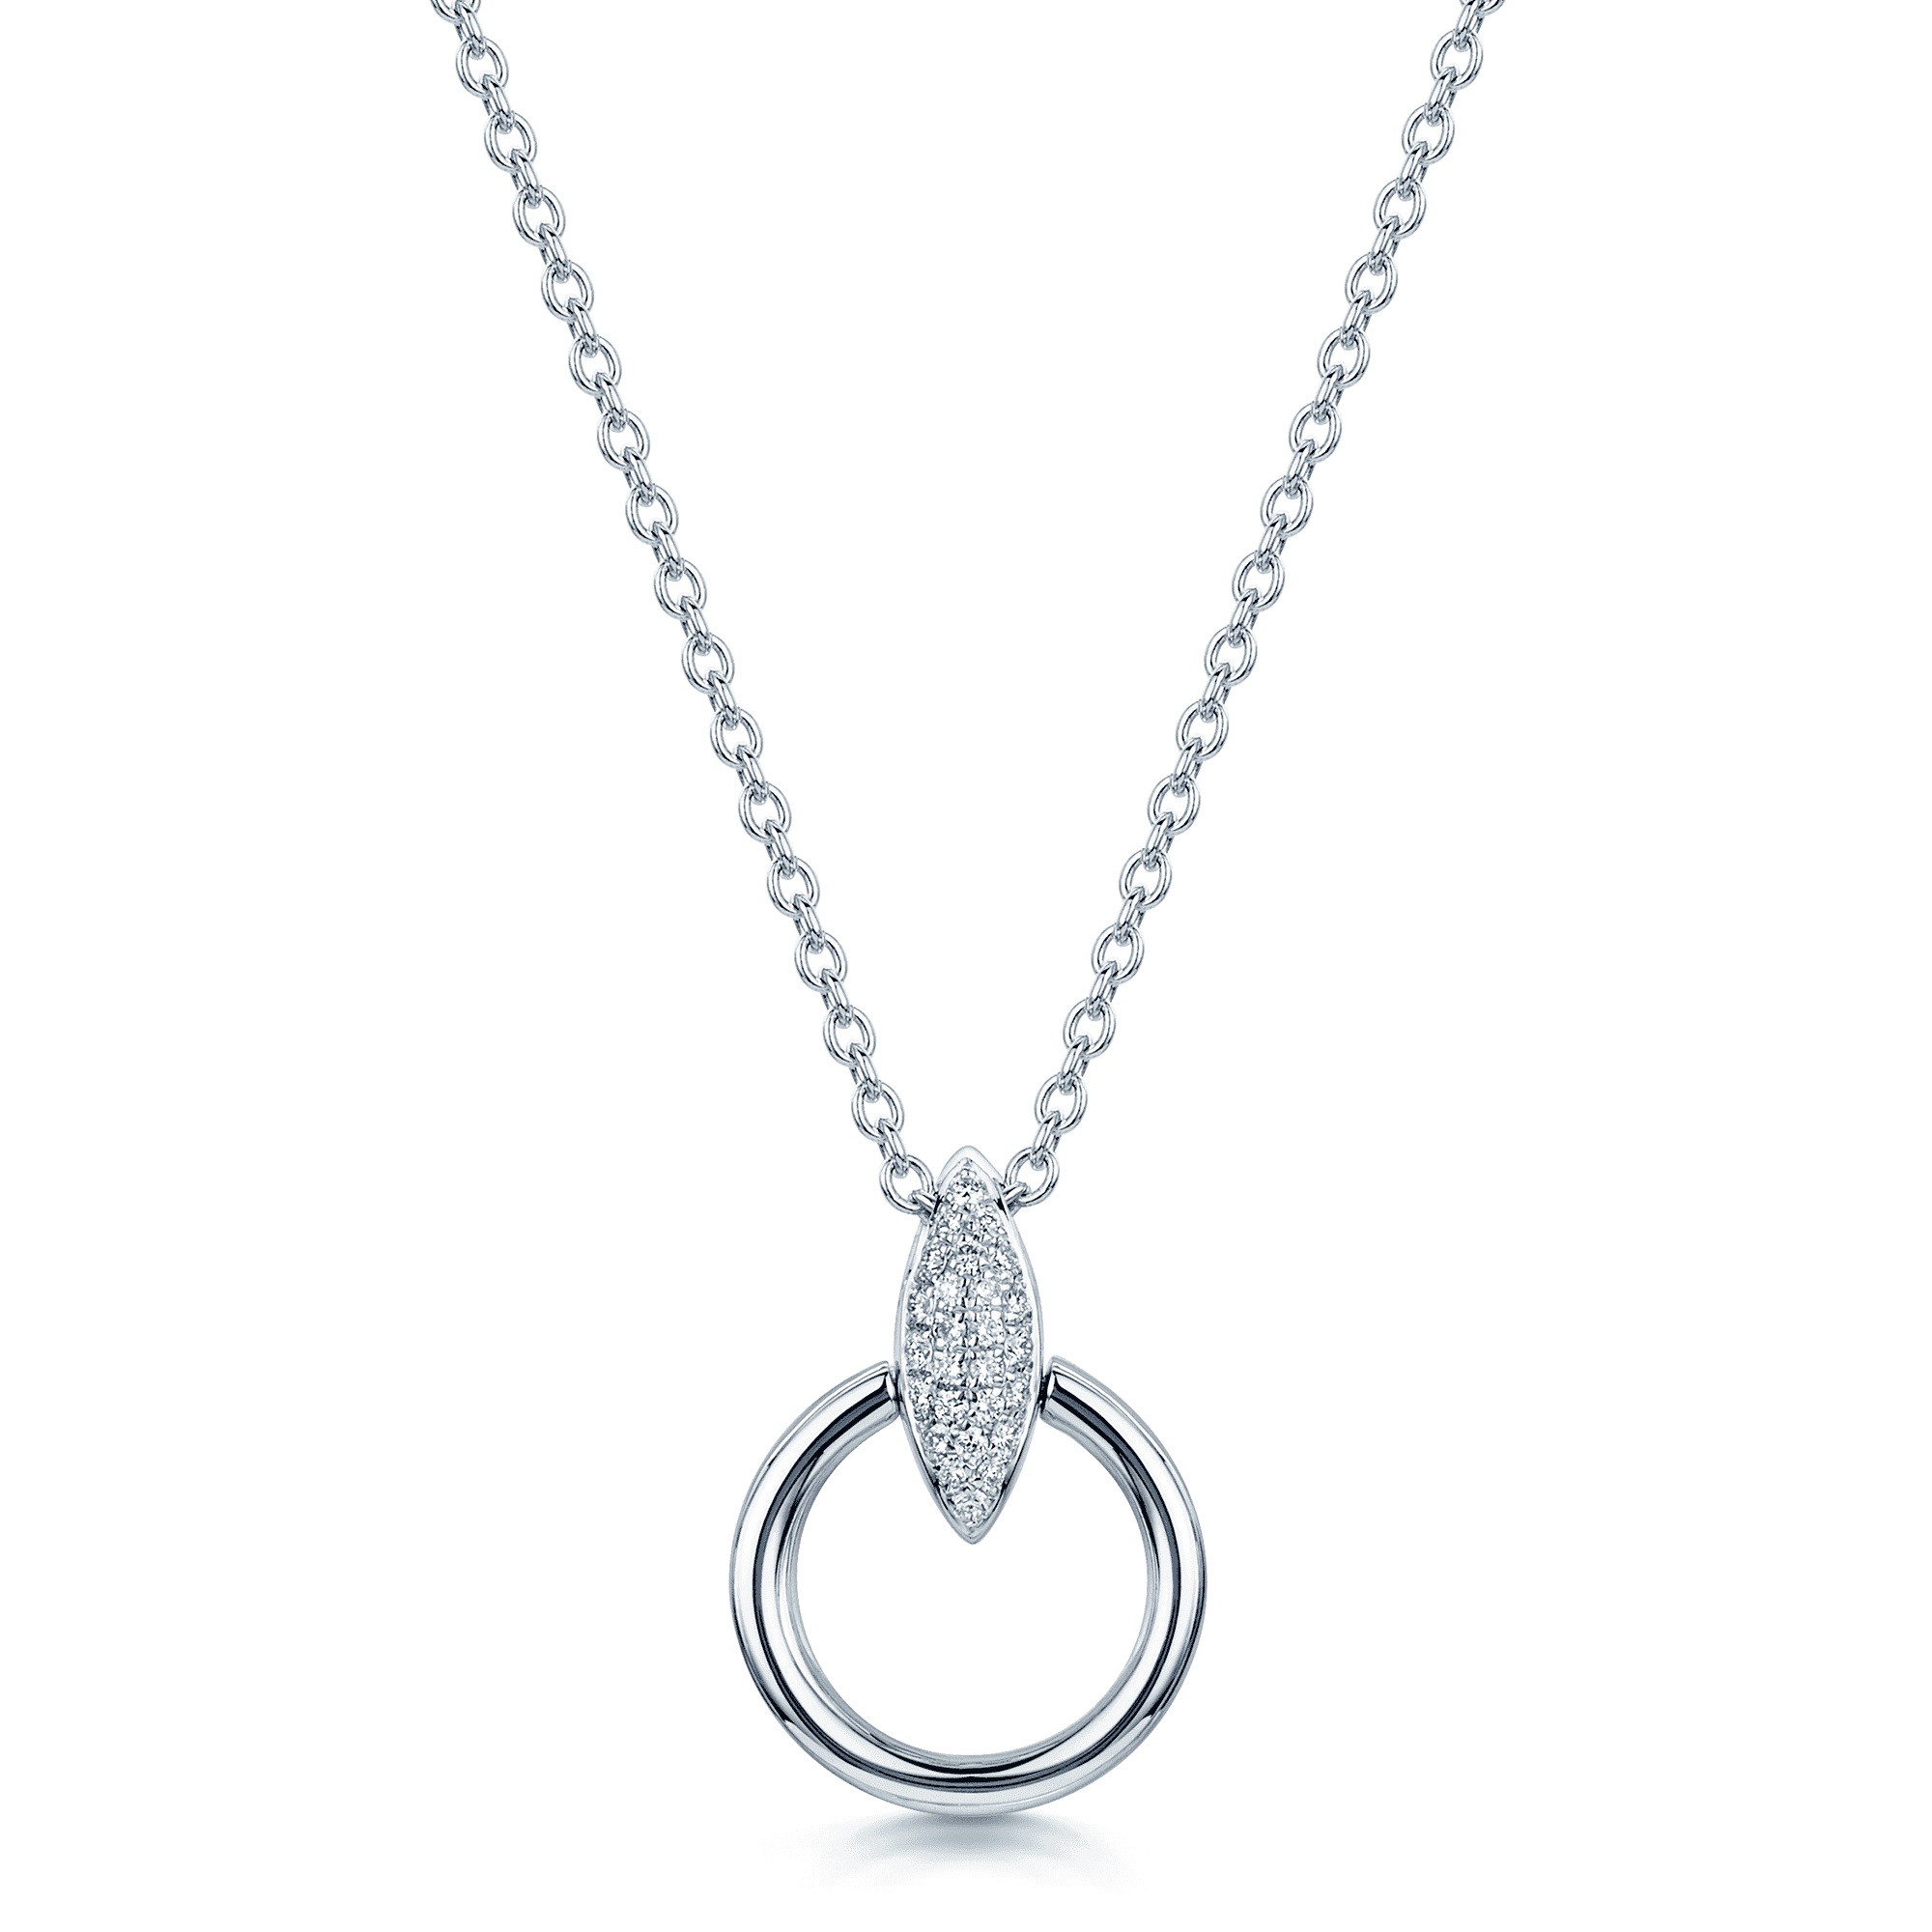 The Origin Collection 18ct White Gold Pave Diamond Seed Drop Circle Necklace